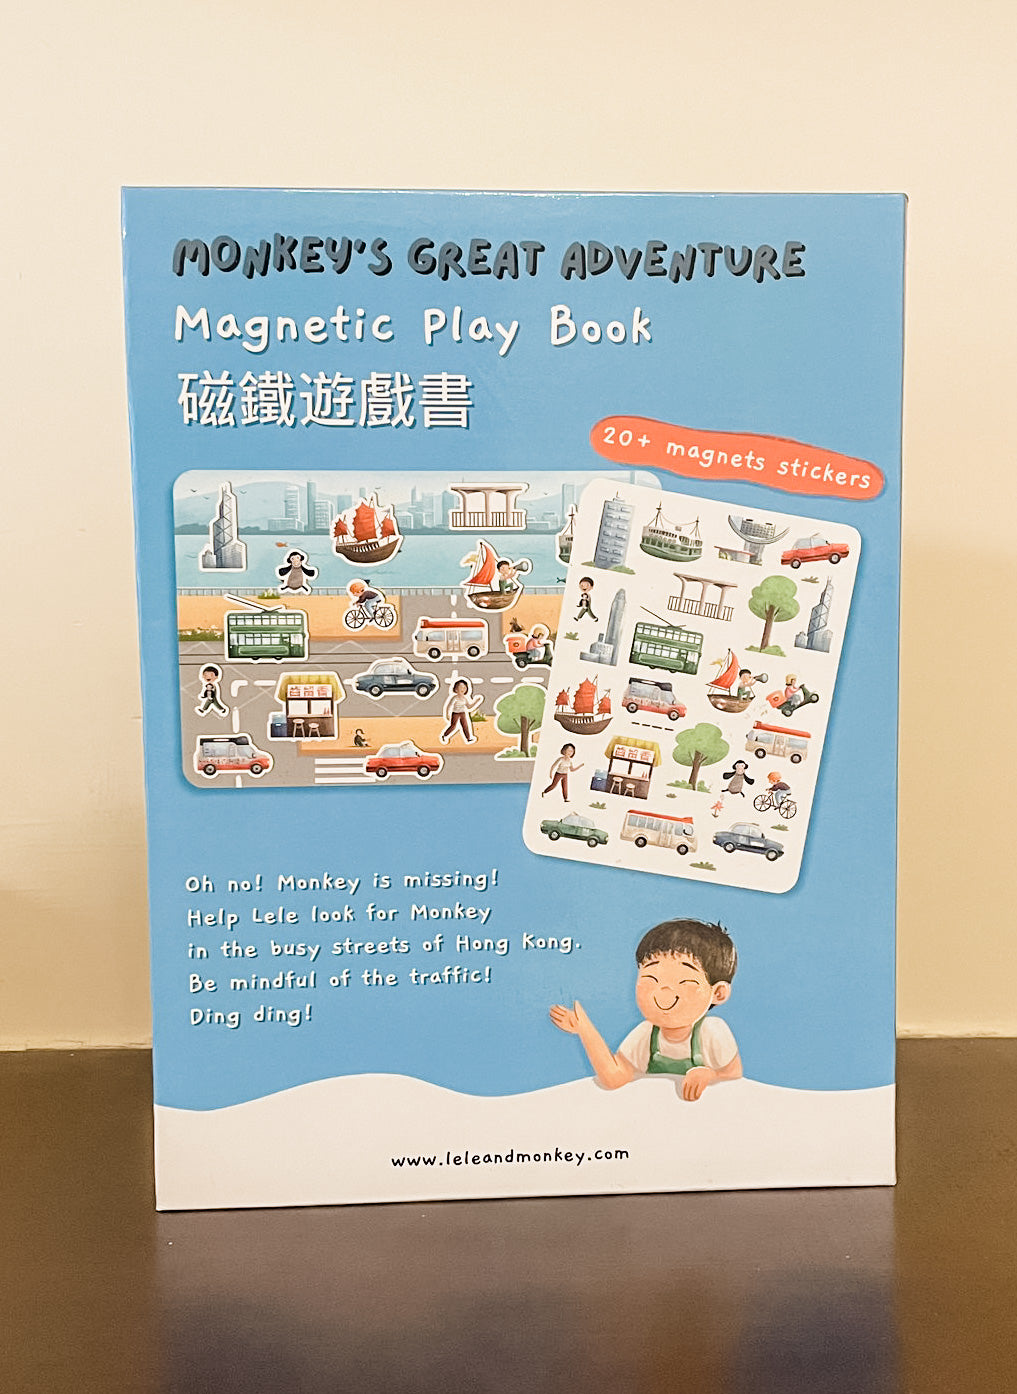 Monkey’s Great Adventure Magnetic Play Book